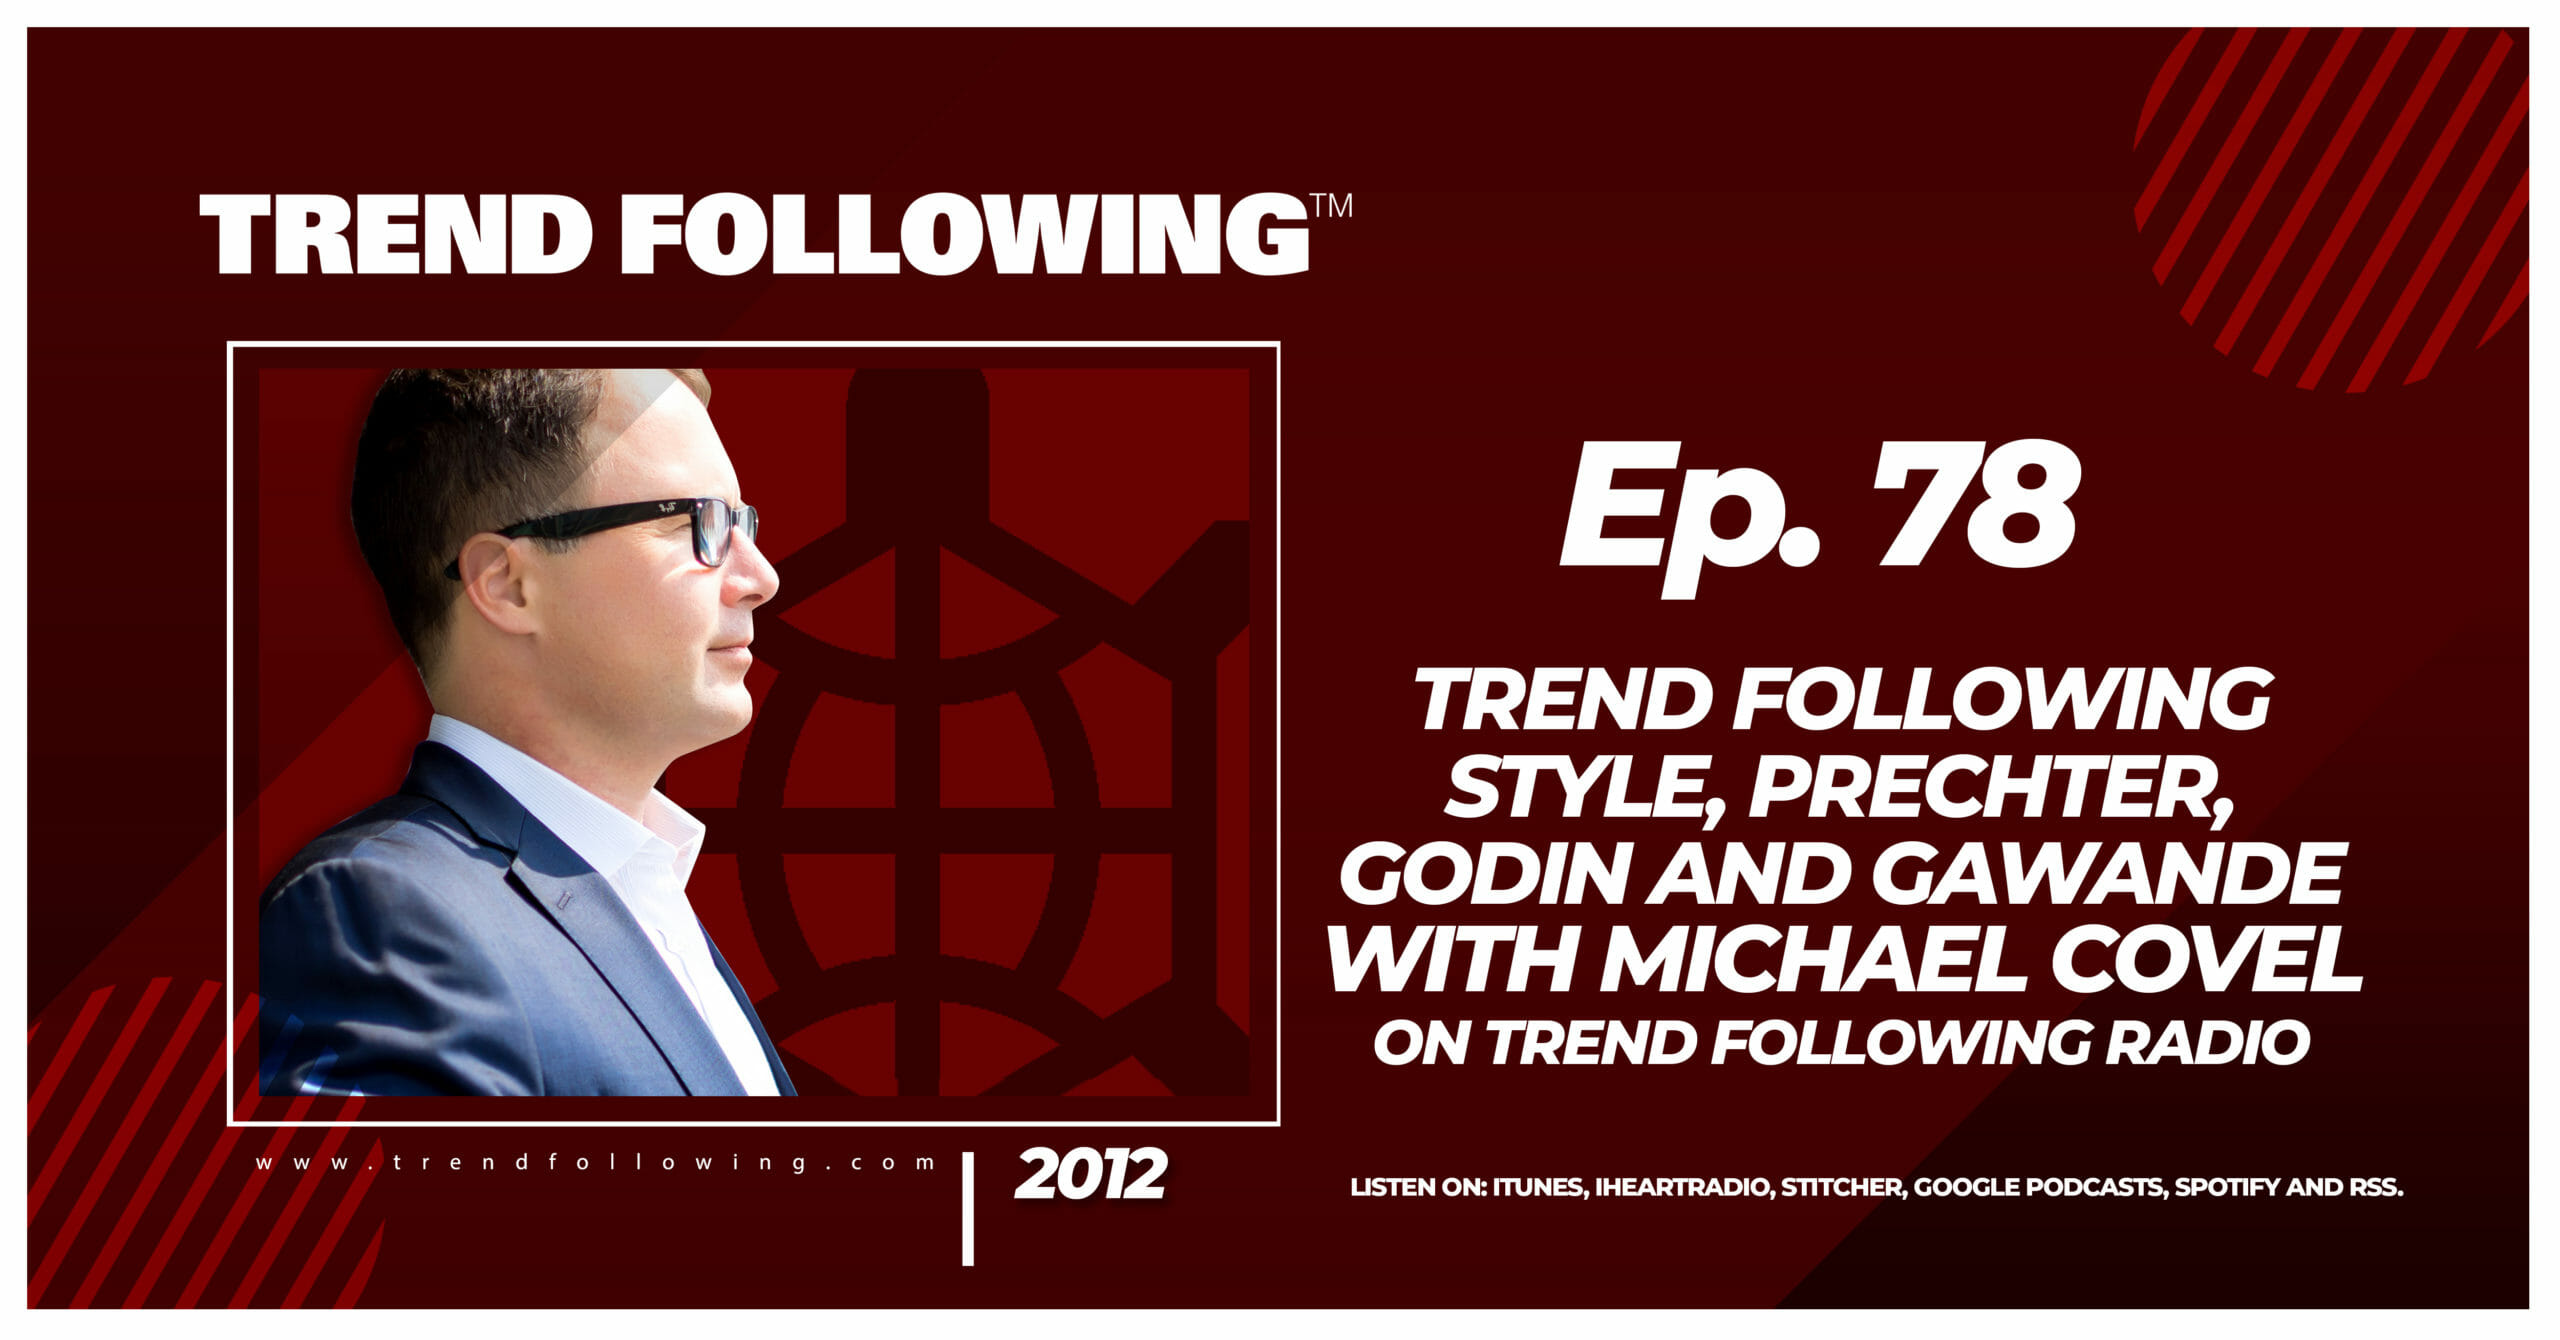 Trend Following Style, Prechter, Godin and Gawande with Michael Covel on Trend Following Radio